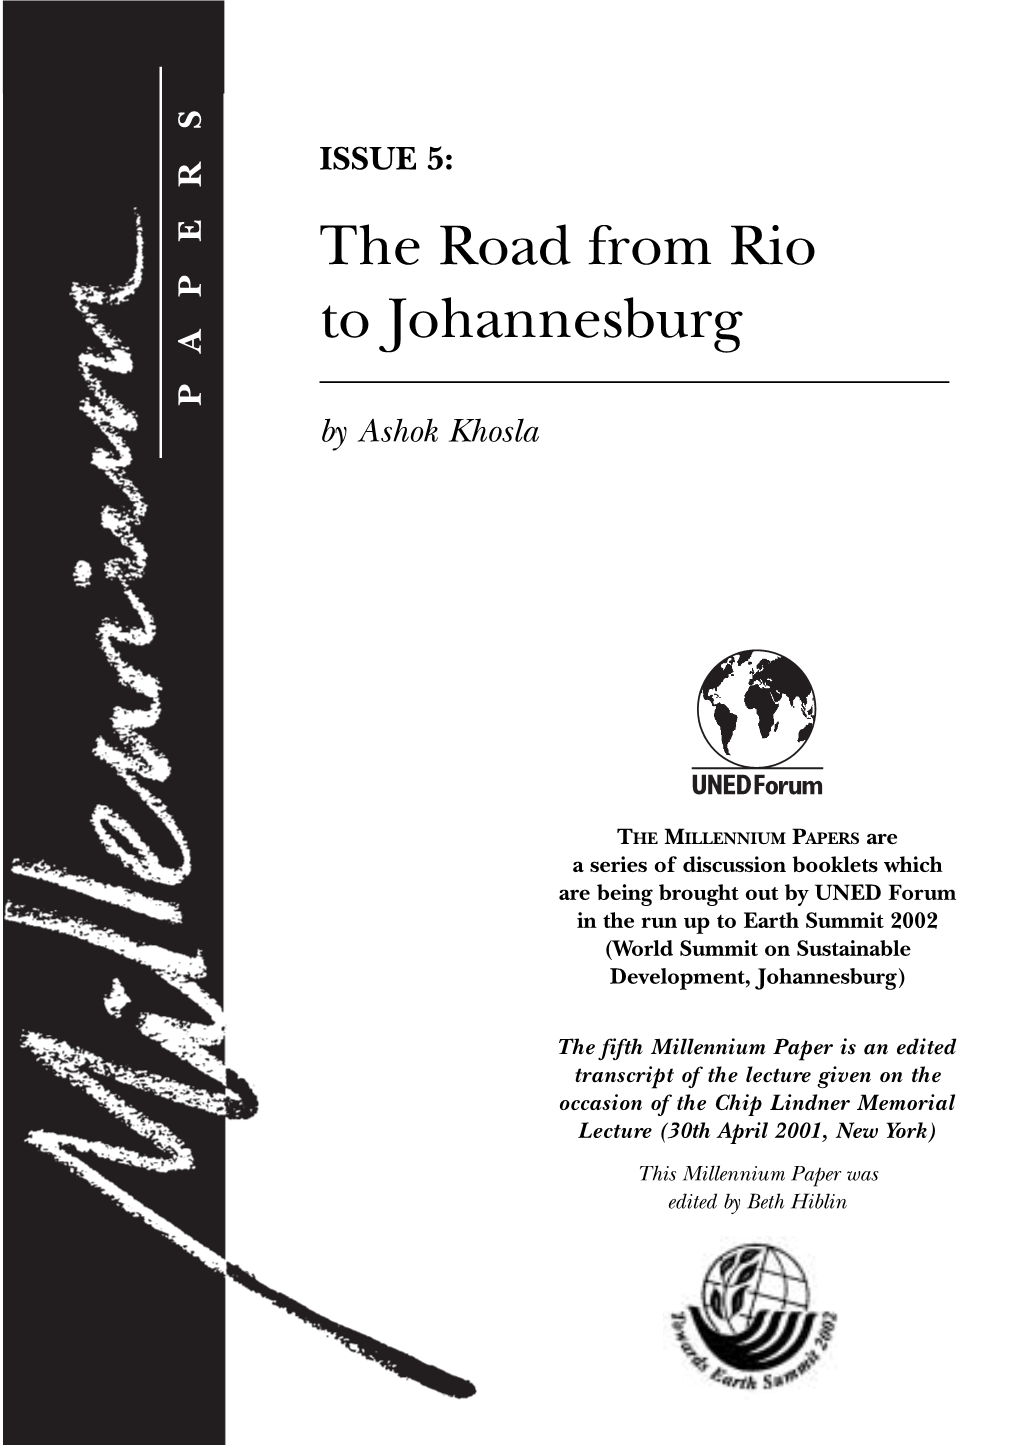 The Road from Rio to Johannesburg PAPERS by Ashok Khosla